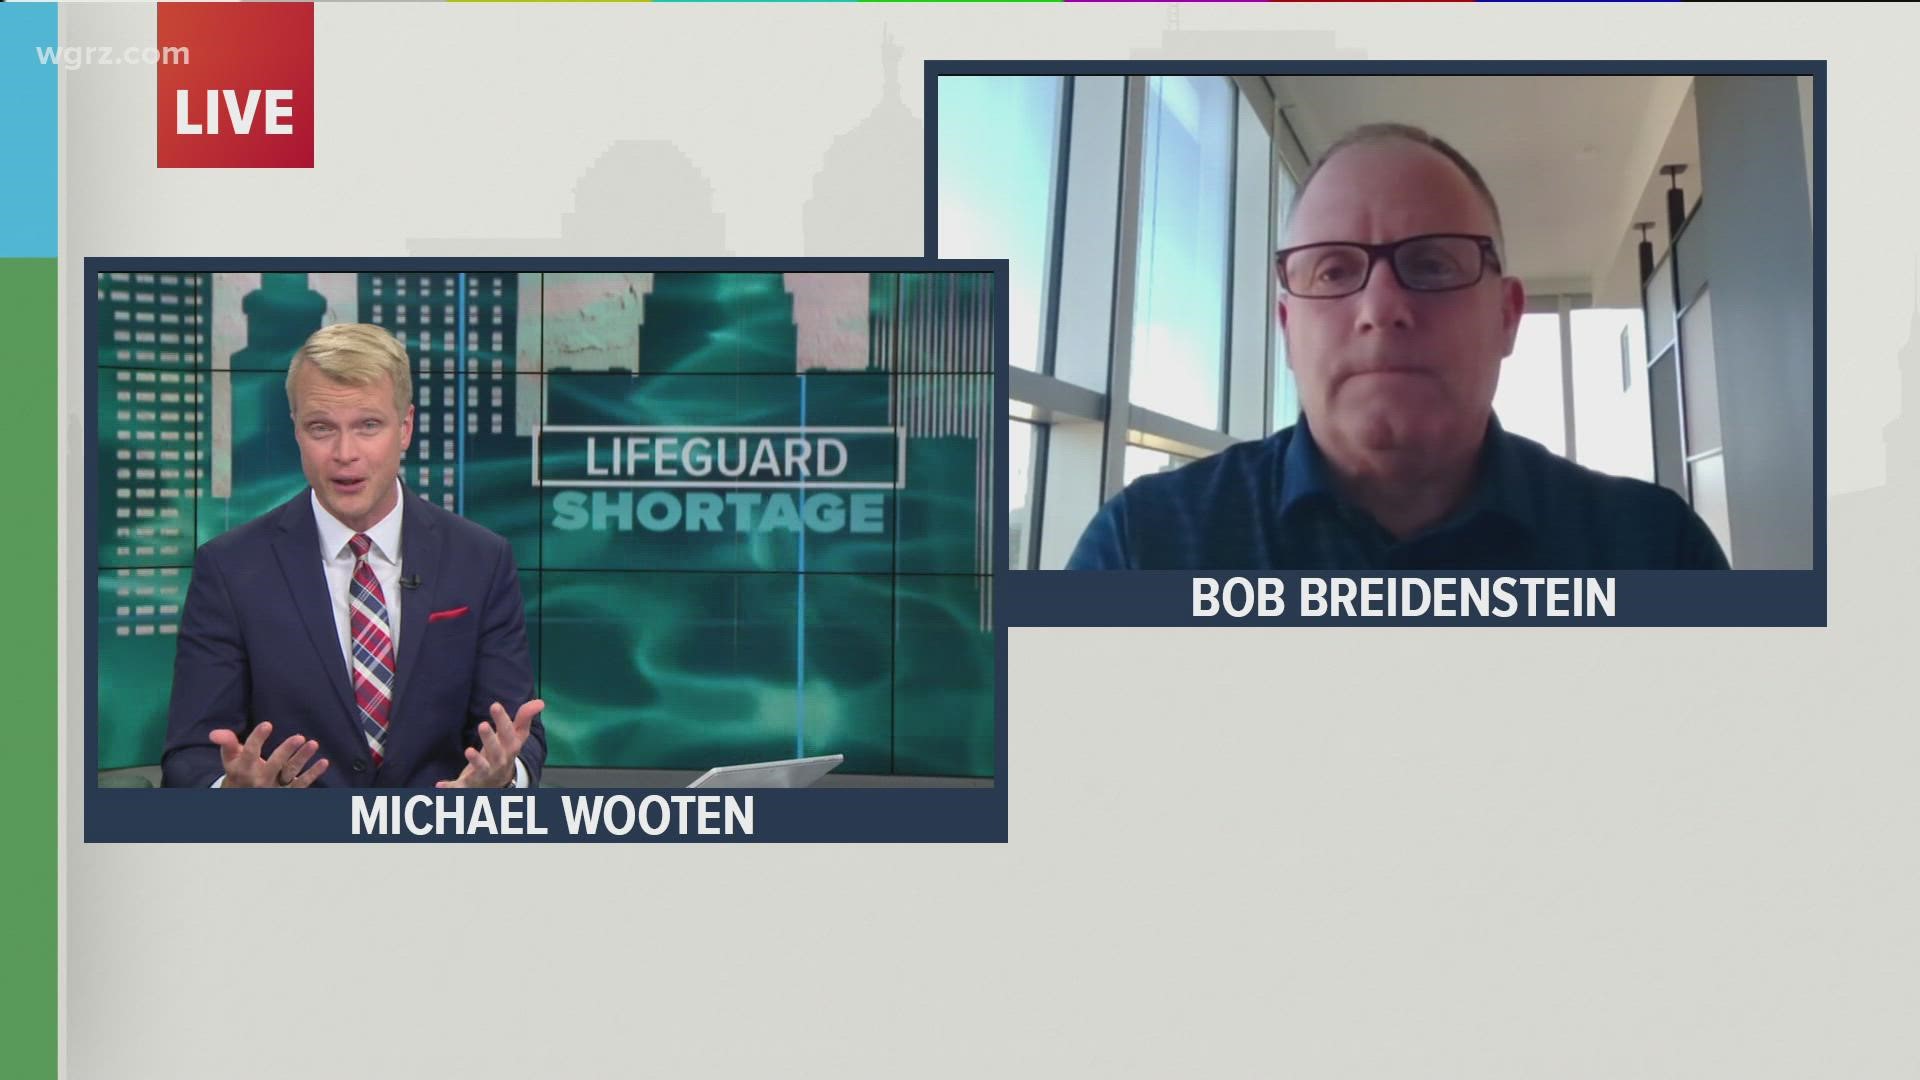 Bob Breidenstein  he sits on the West Seneca town board, joins the Town hall to discuss the shortage of lifeguard